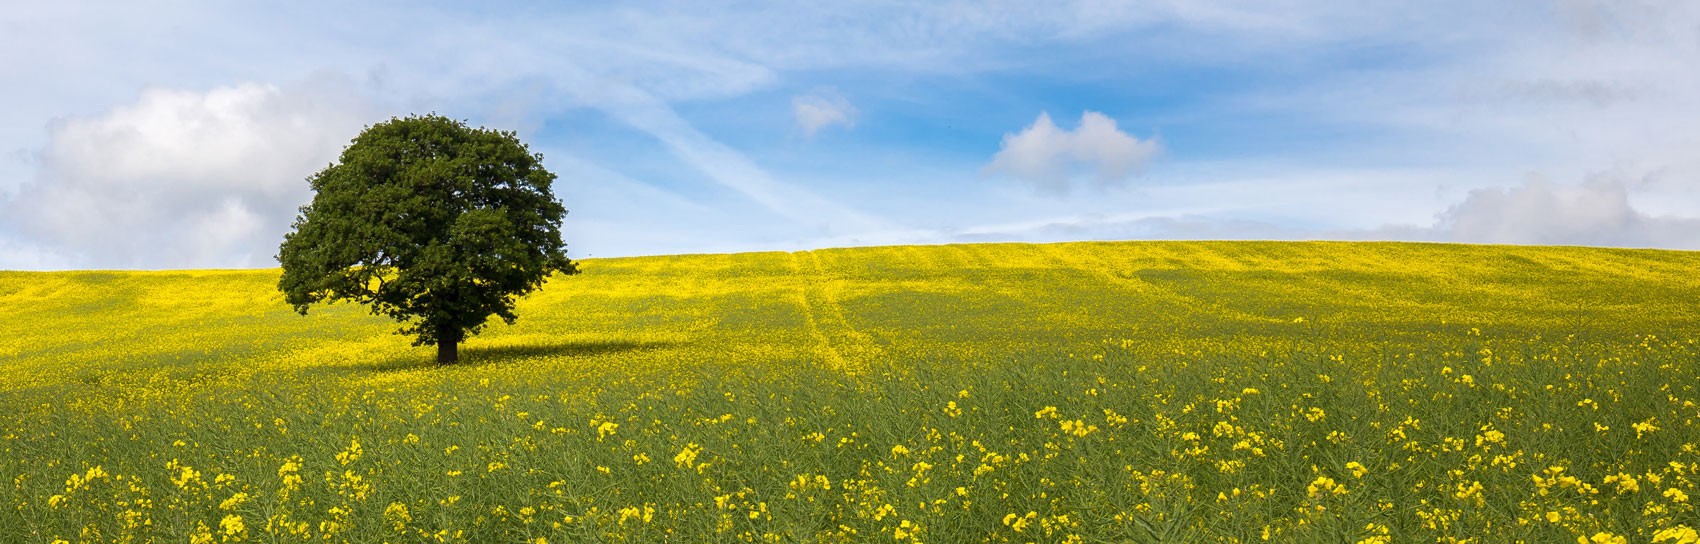 Lone tree, rapeseed field, Wooley. Photograph by DAVE ZDANOWICZ